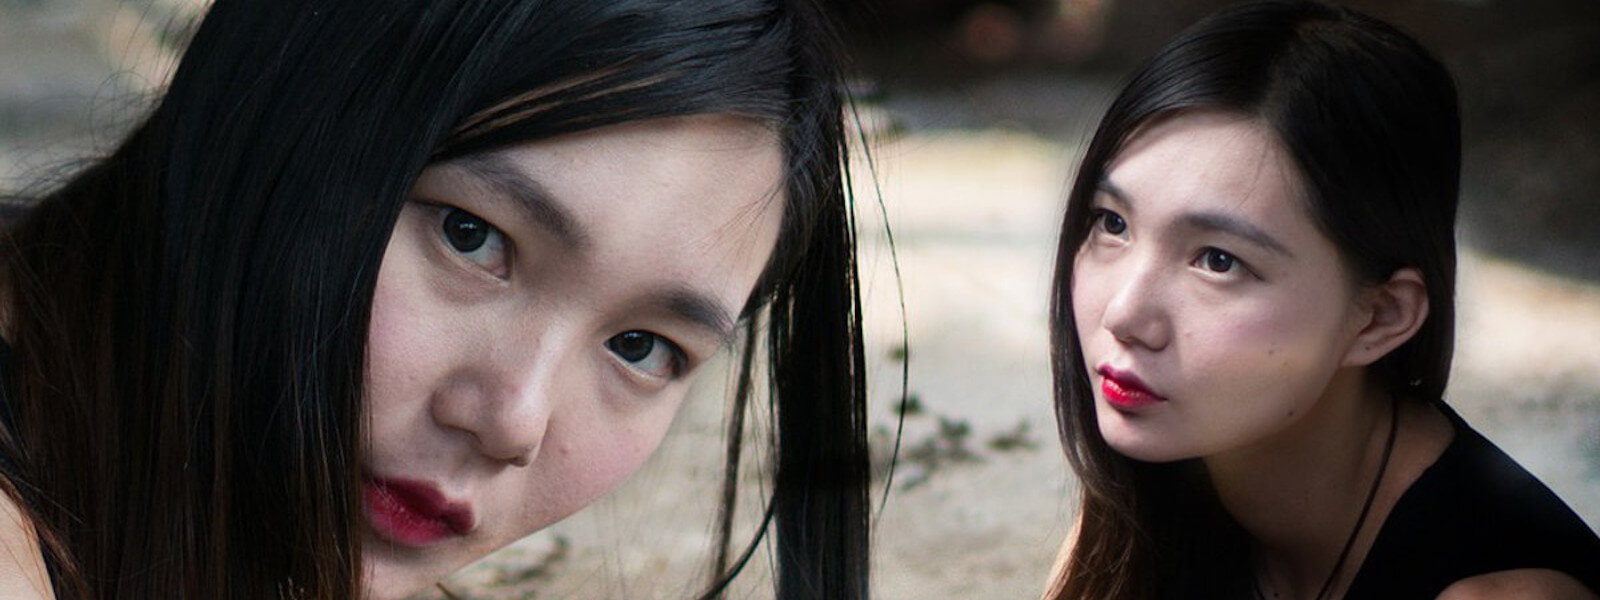 Two identical asian women are looking at the camera and each other.